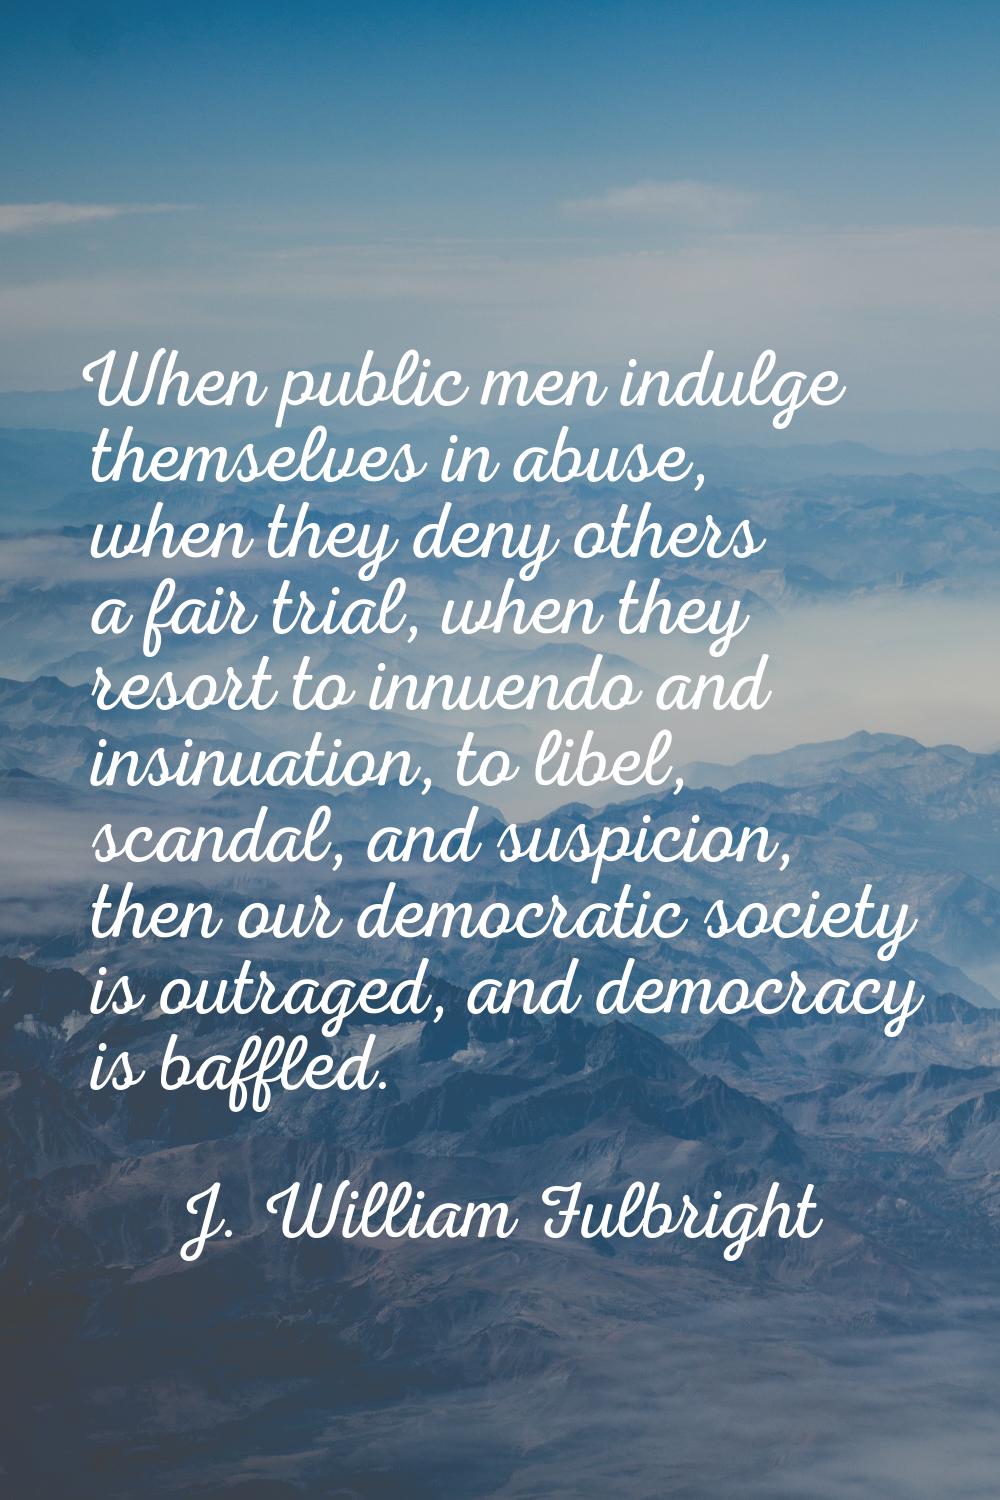 When public men indulge themselves in abuse, when they deny others a fair trial, when they resort t